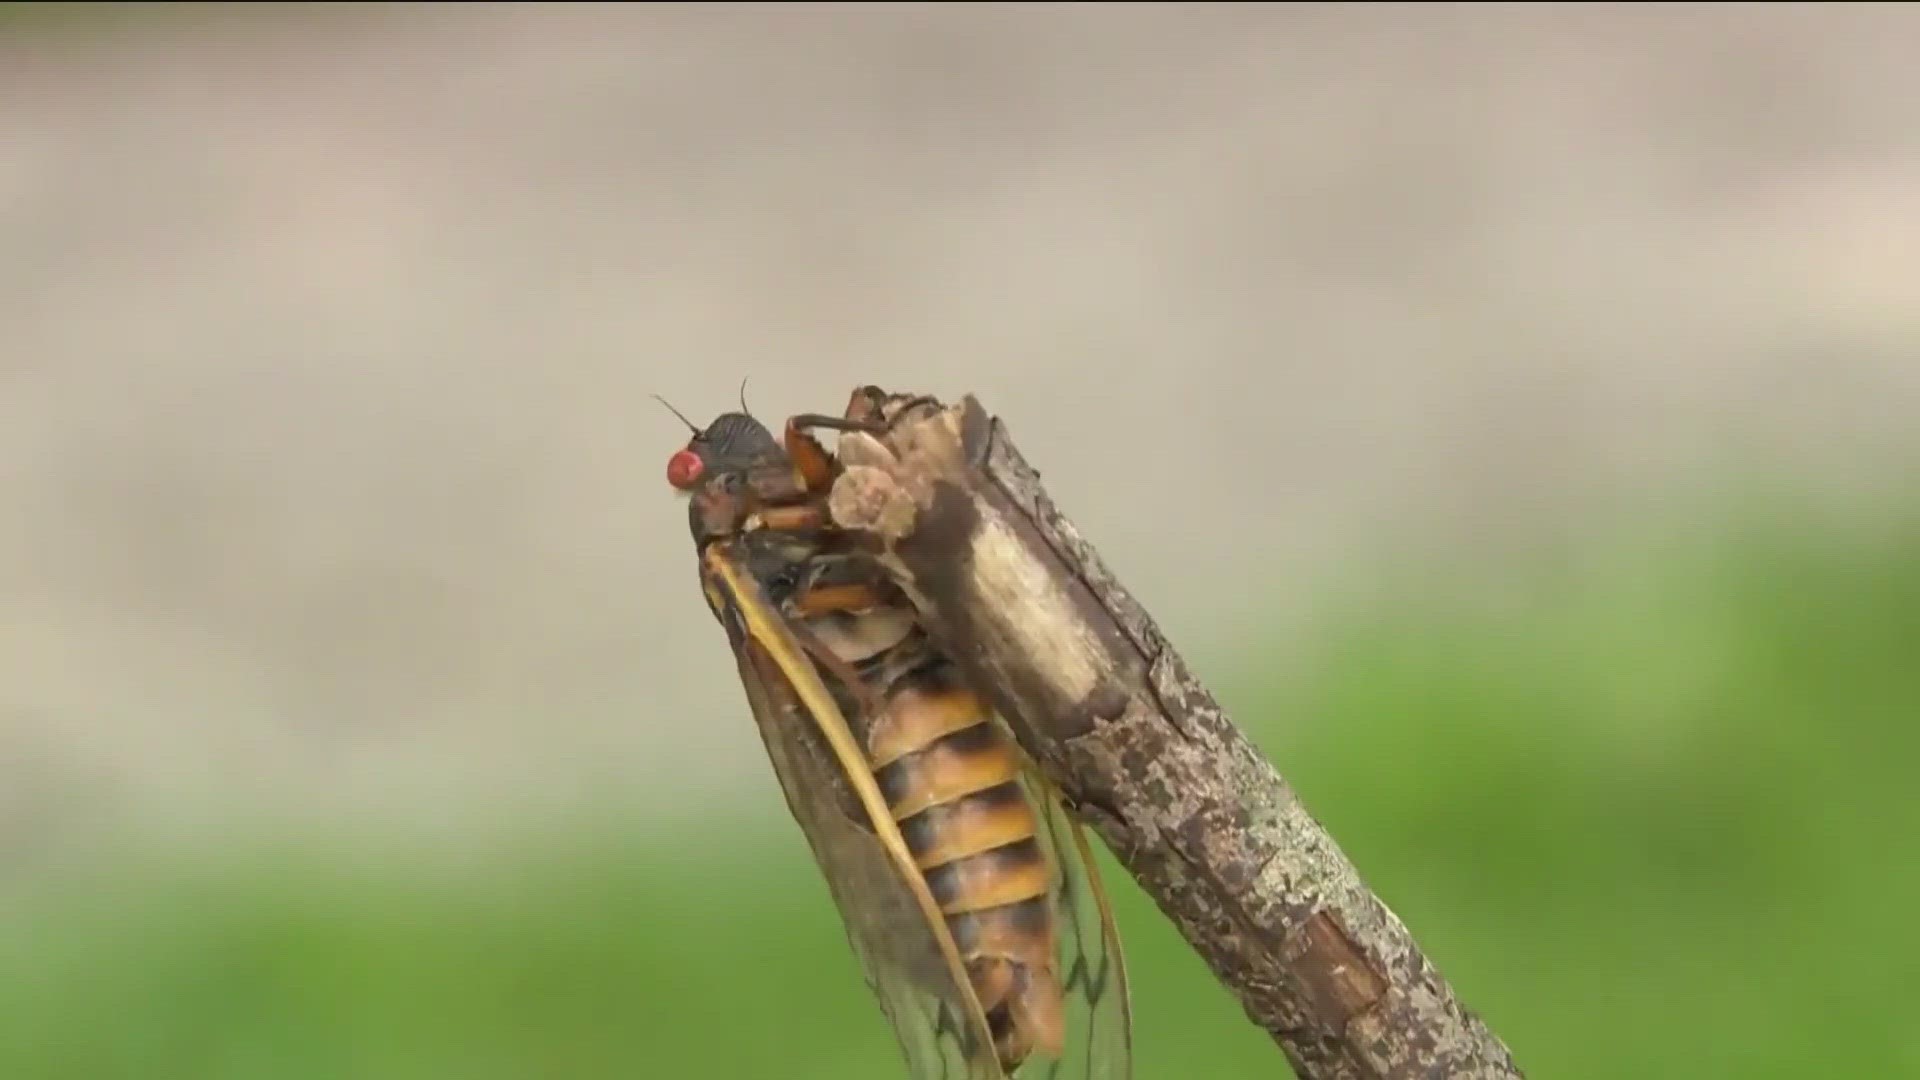 FOR THE FIRST TIME SINCE THE LOUISIANA PURCHASE IN 1803 THERE WILL BE TWO BROODS OF CICADAS COMING OUT OF THE GROUND AT THE SAME TIME.